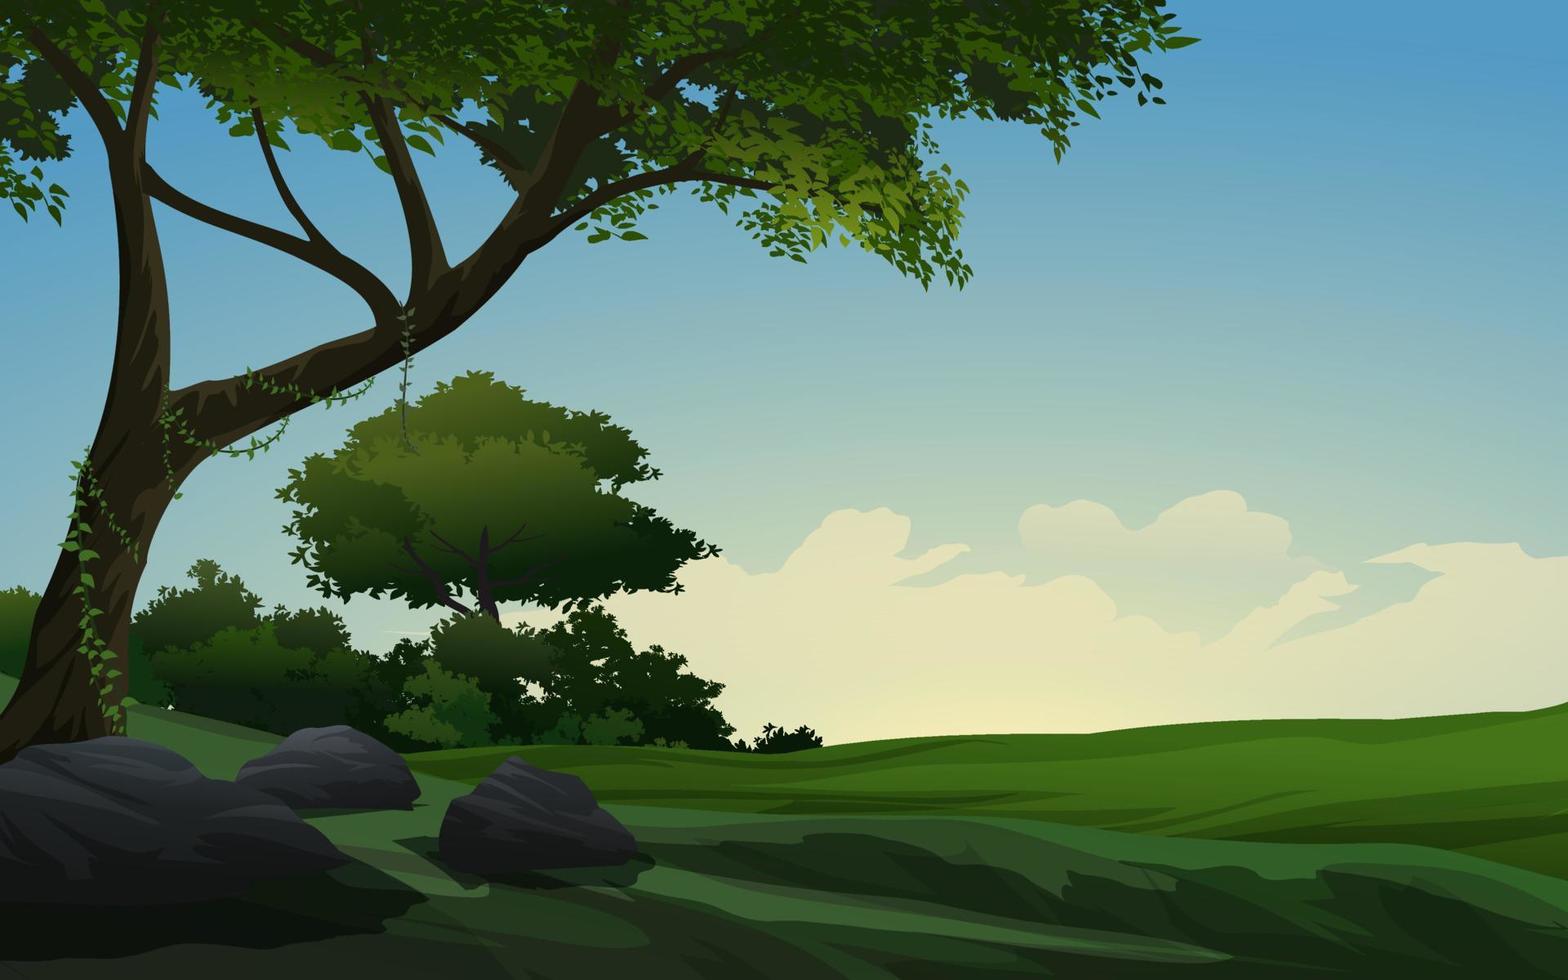 Grassland morning time landscape with trees and rocks vector